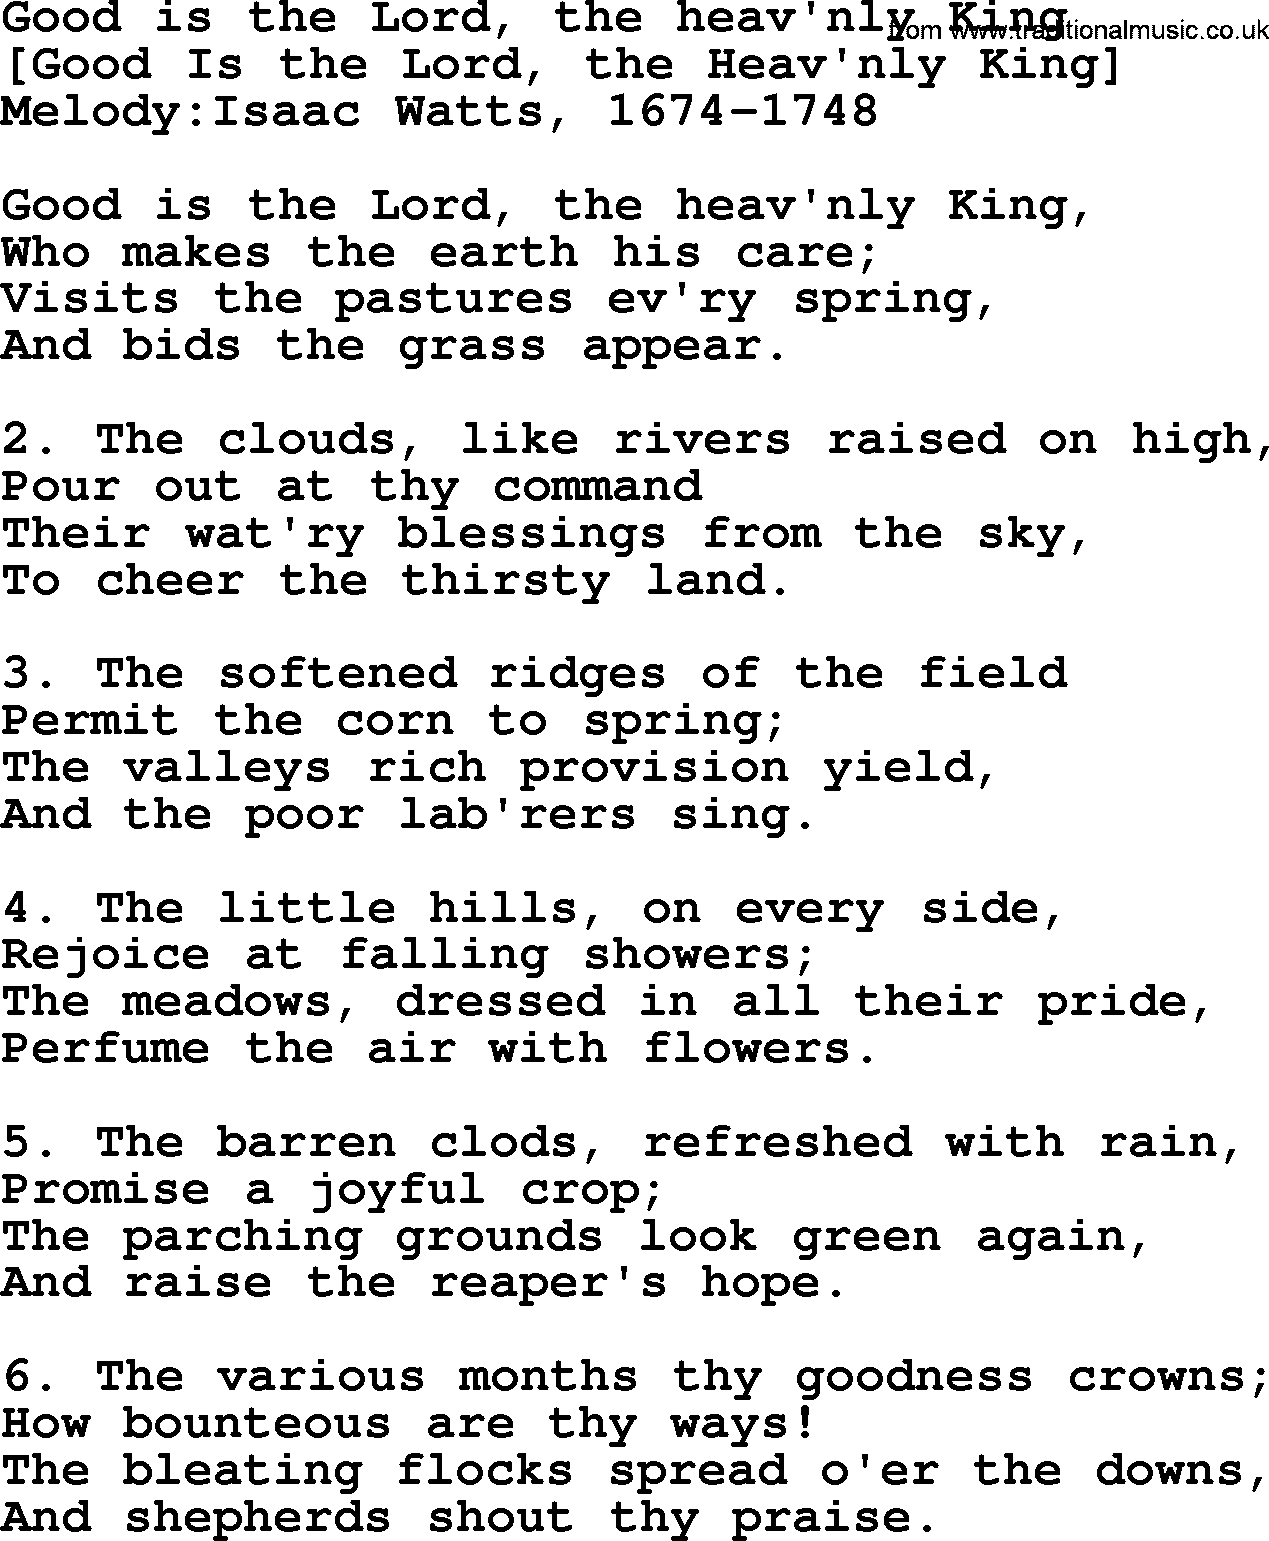 Old English Song: Good Is The Lord, The Heav'nly King lyrics